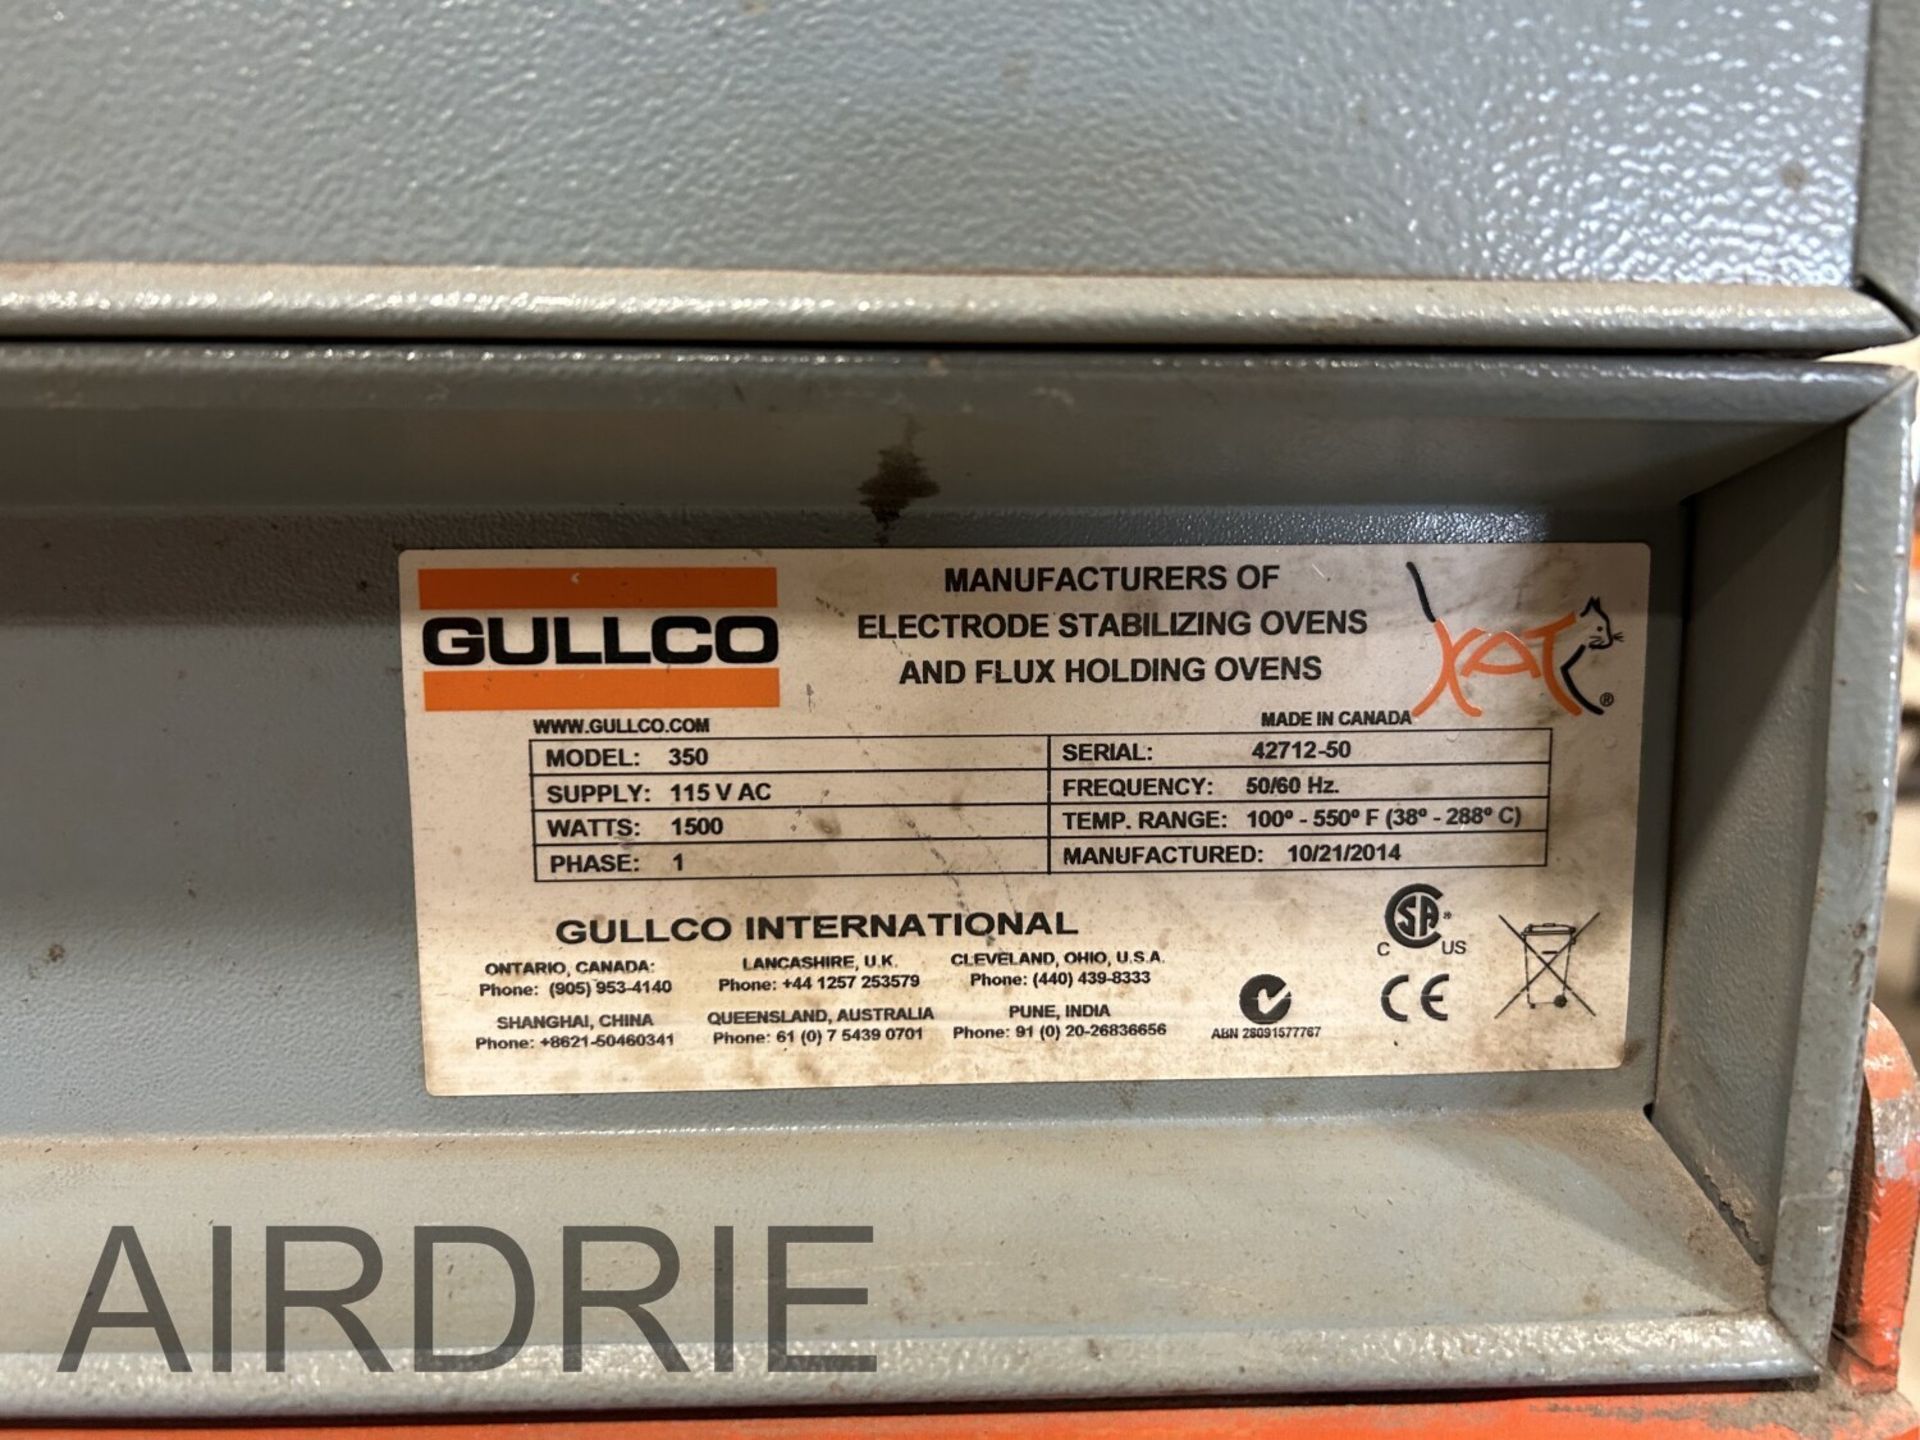 *OFFSITE* GULLCO 350 ELECTRODE STABILIZING OVEN W/ STEEL STAND, S/N 42712-50 (DOES NOT INCLUDE - Image 6 of 7